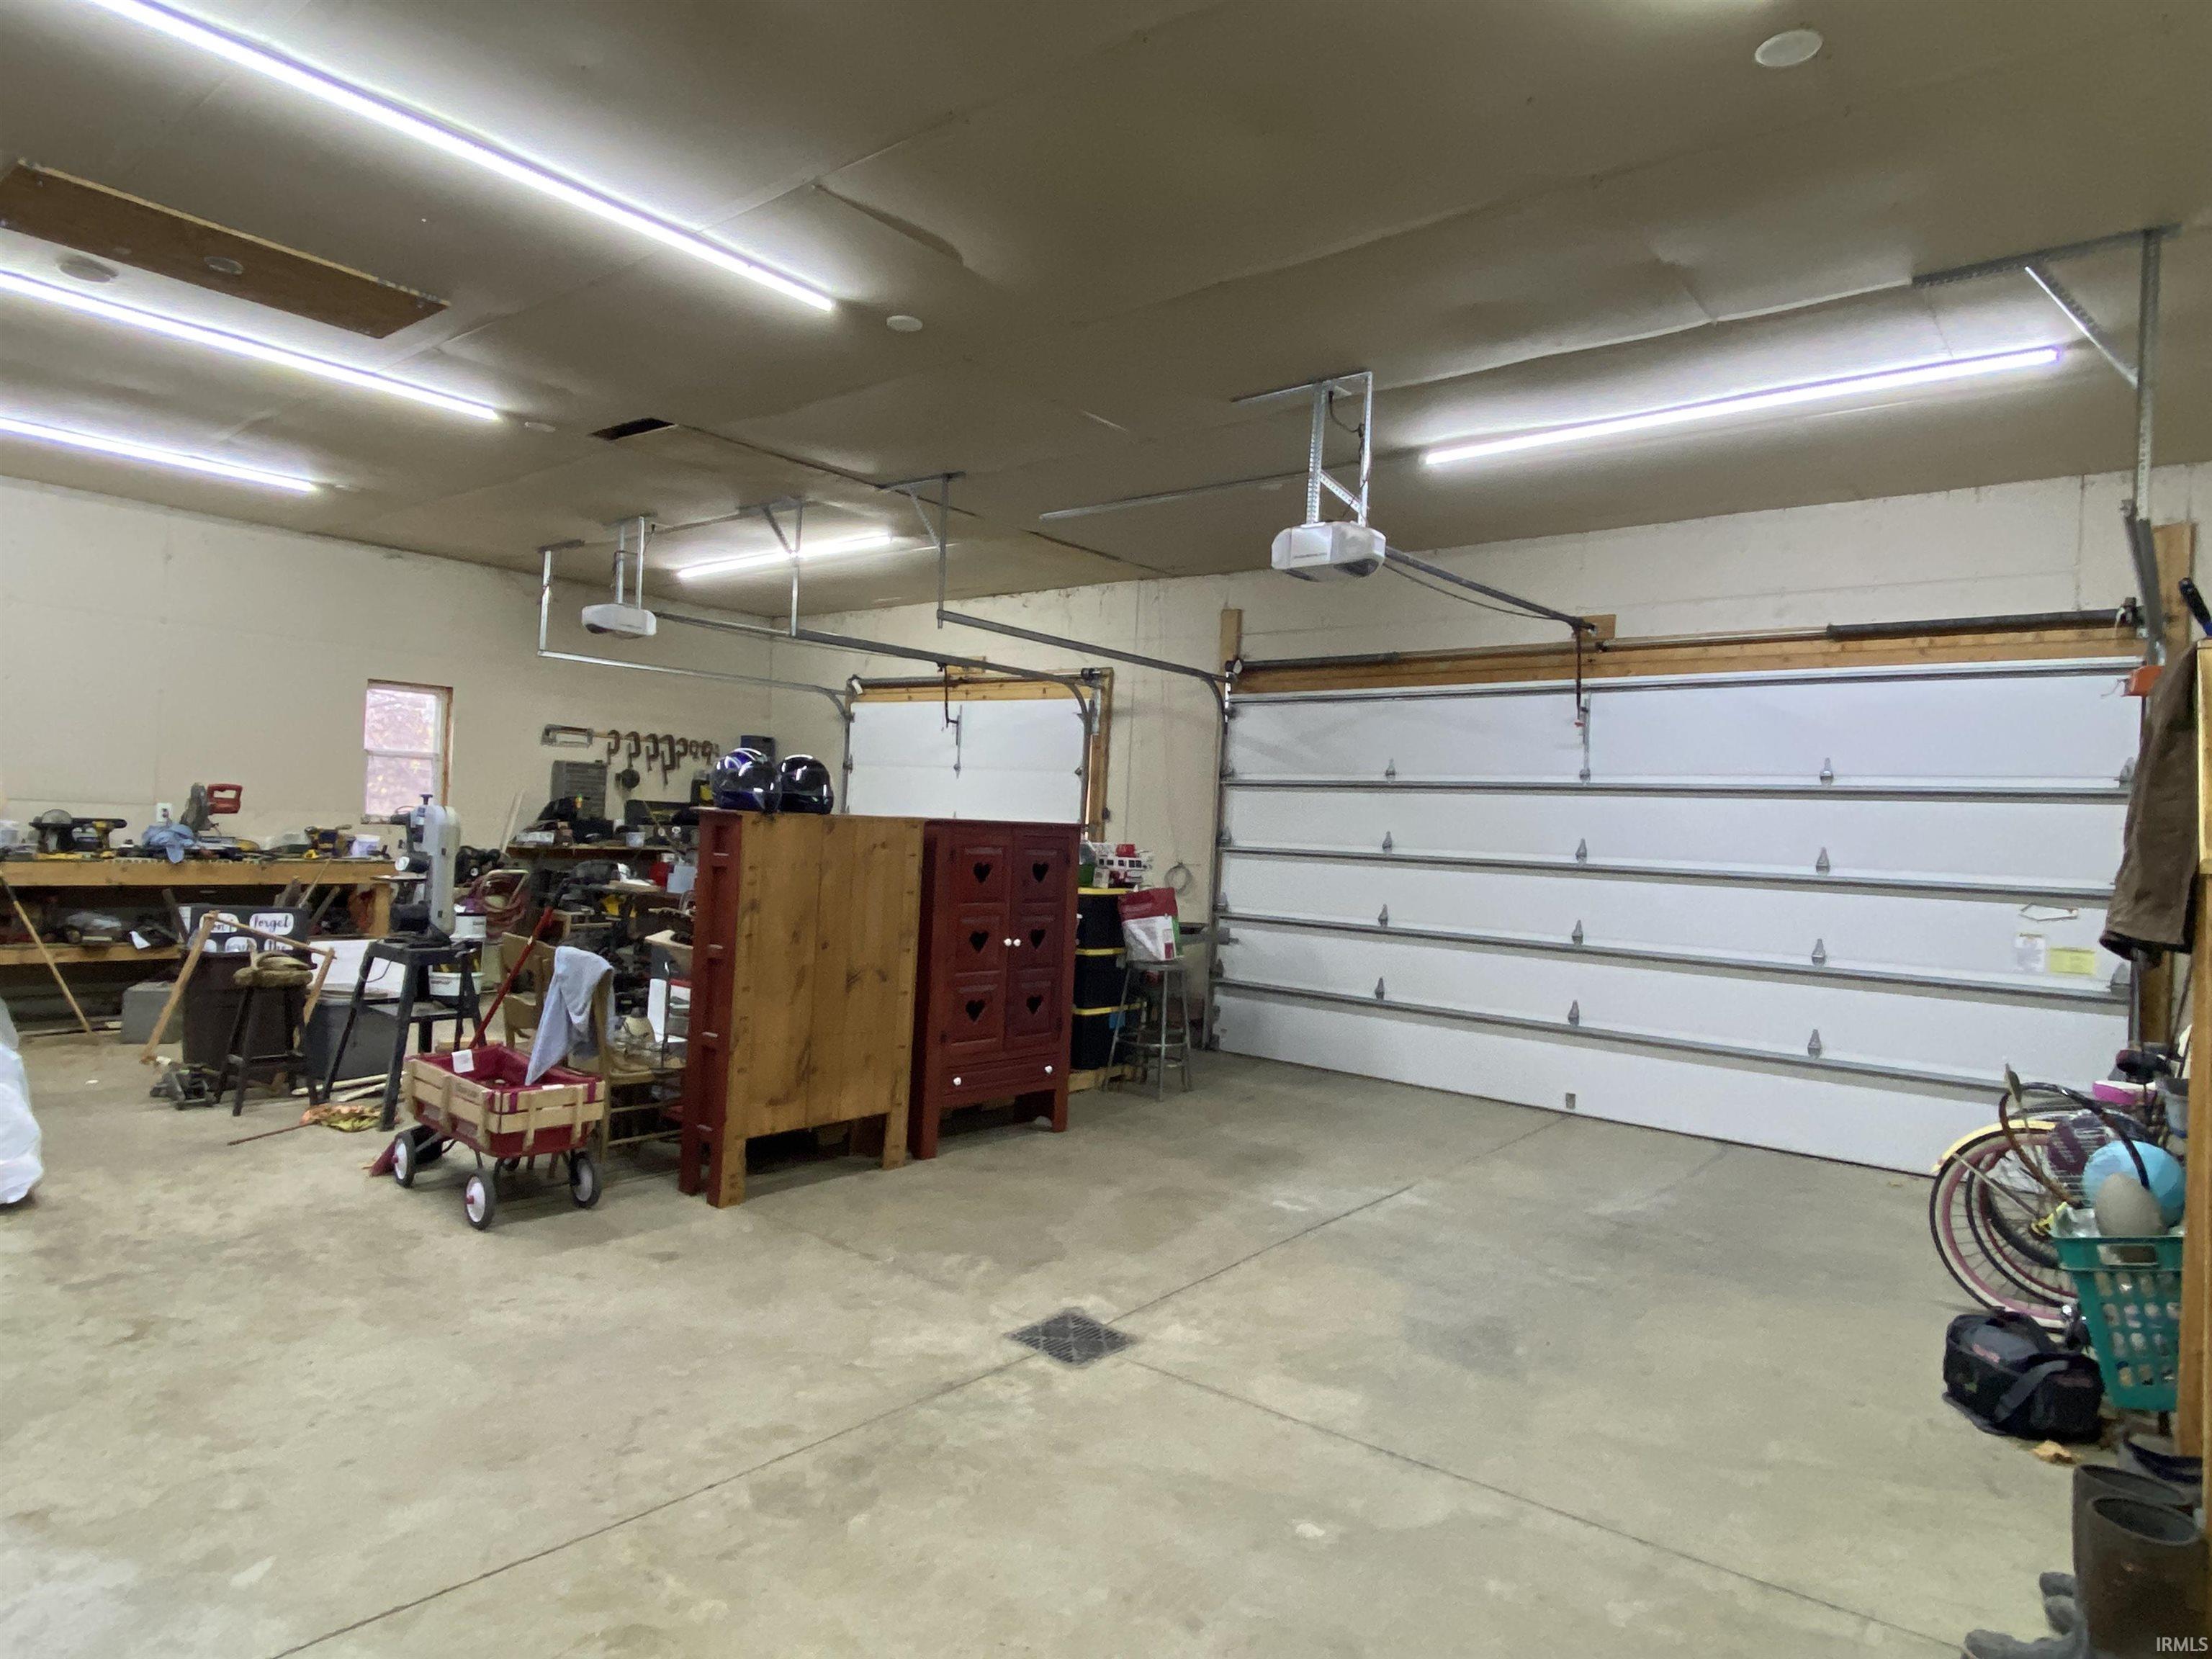 Garage has Attic Winch System to Make Storage a Breeze!  Heated Floors are also ready to be hooked up in the Garage.